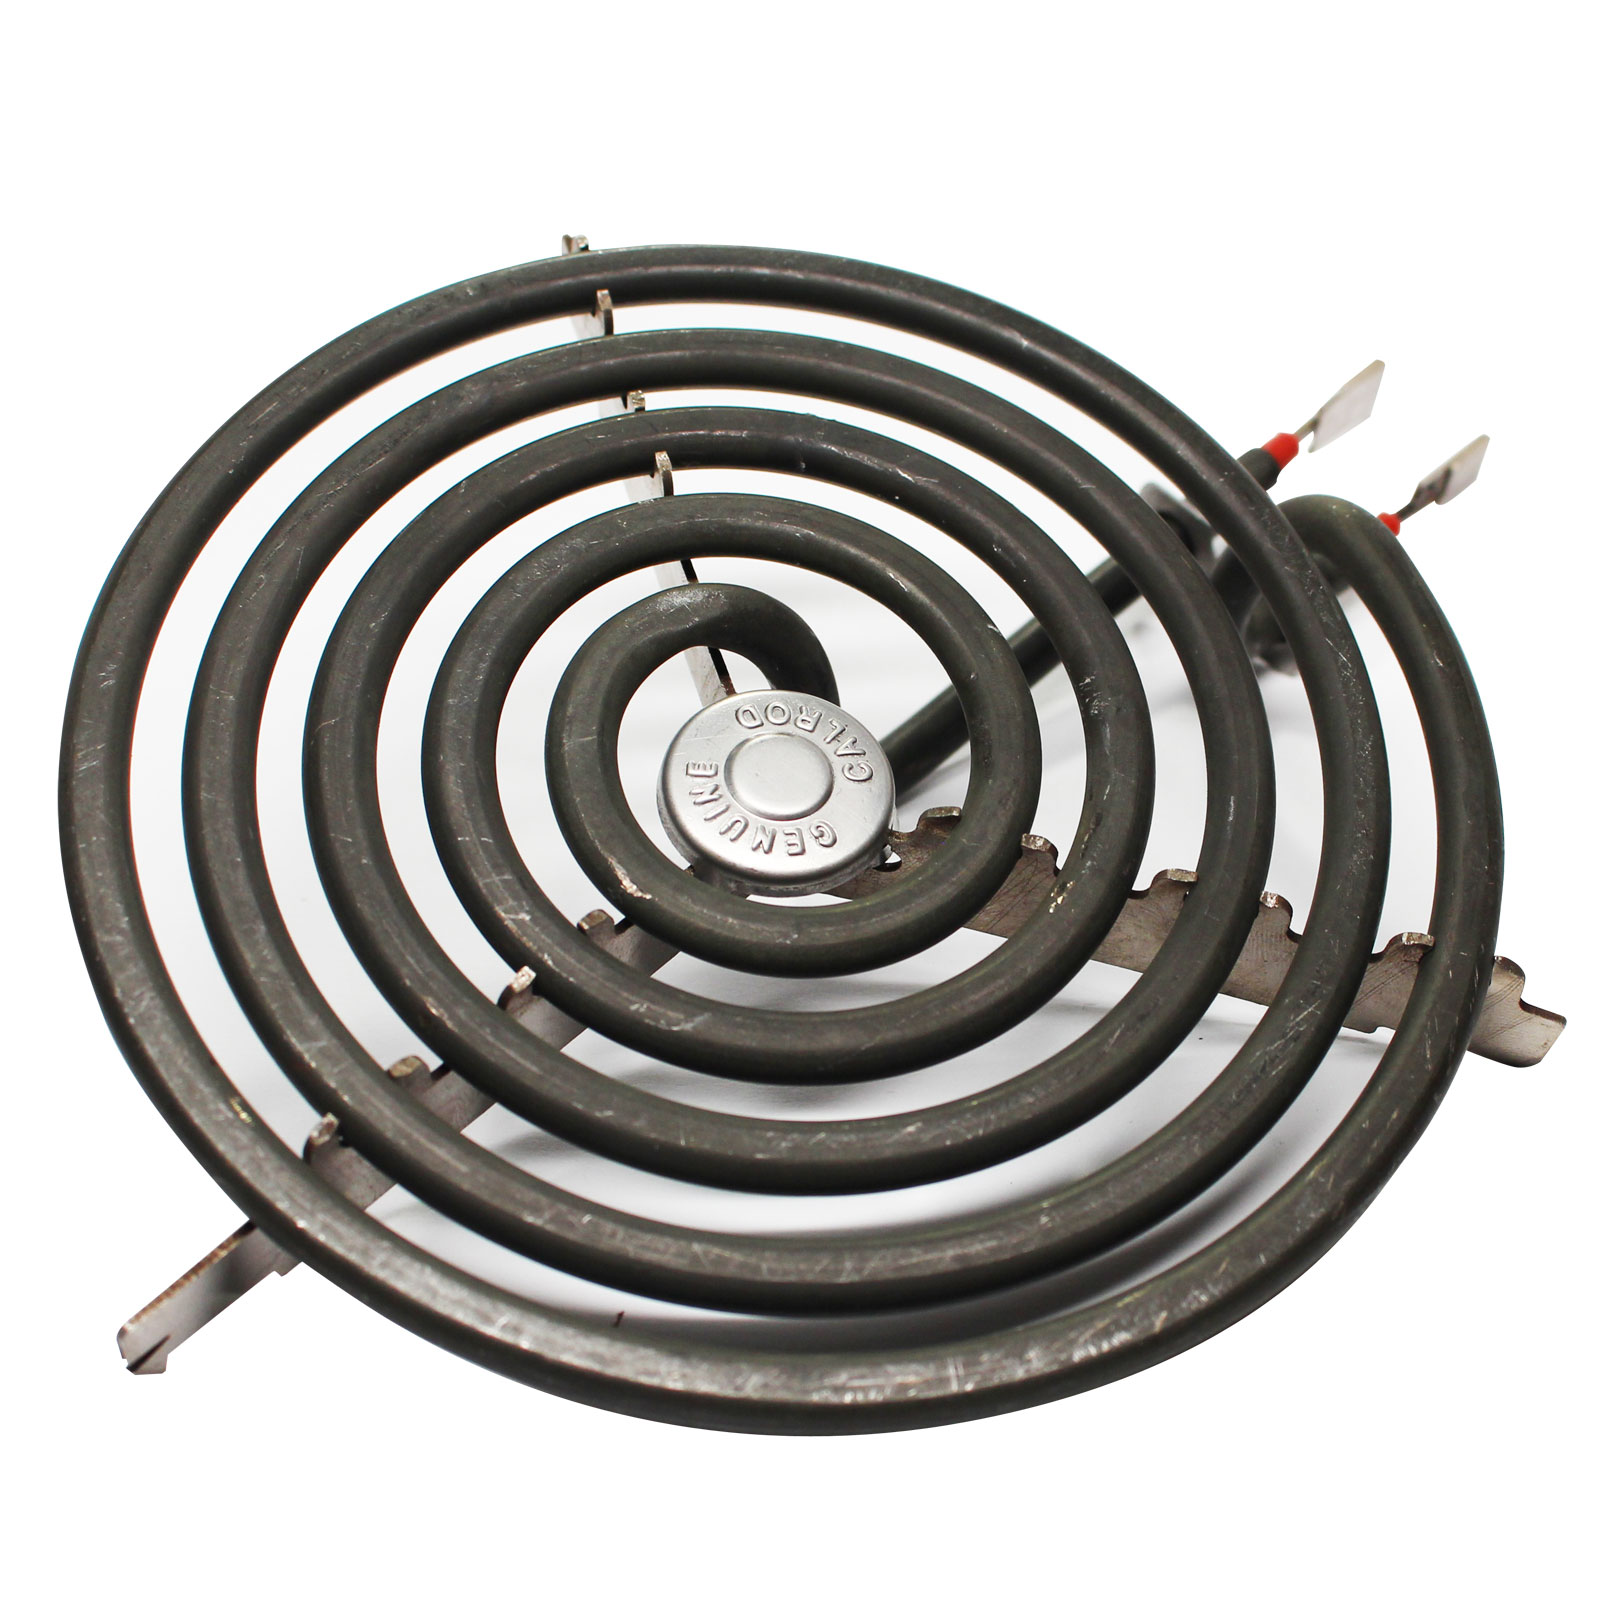 Compatible General Electric JP383B9R1BC 8 inch 6 Turns & 6 inch 5 Turns Surface Burner Elements - Compatible General Electric WB30M1 & WB30M2 Heating Element for Range, Stove & Cooktop - image 3 of 4